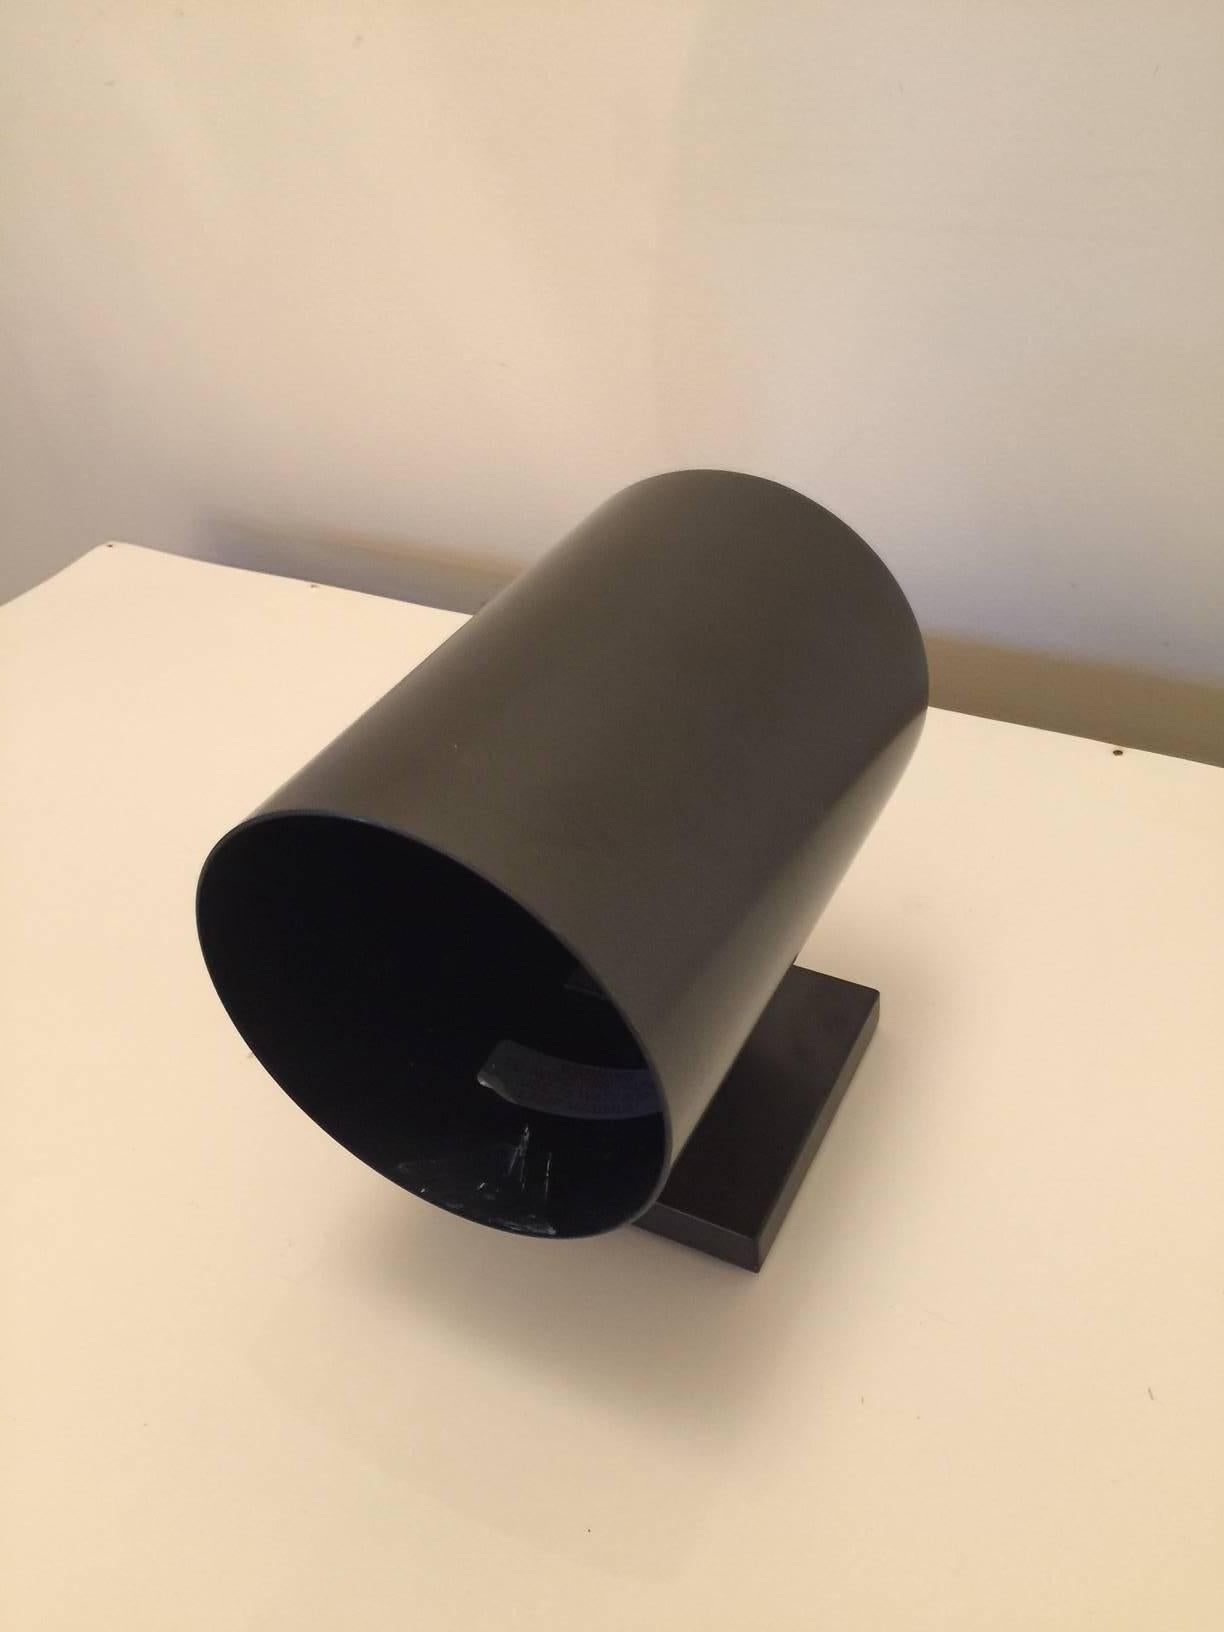 These are bronze finish powder coated metal cylindrical wall lights with a single bulb (max wattage 100). They can be down-light or up-light depending on your desire/needs. Five are available. They are in as found working condition.

Note: